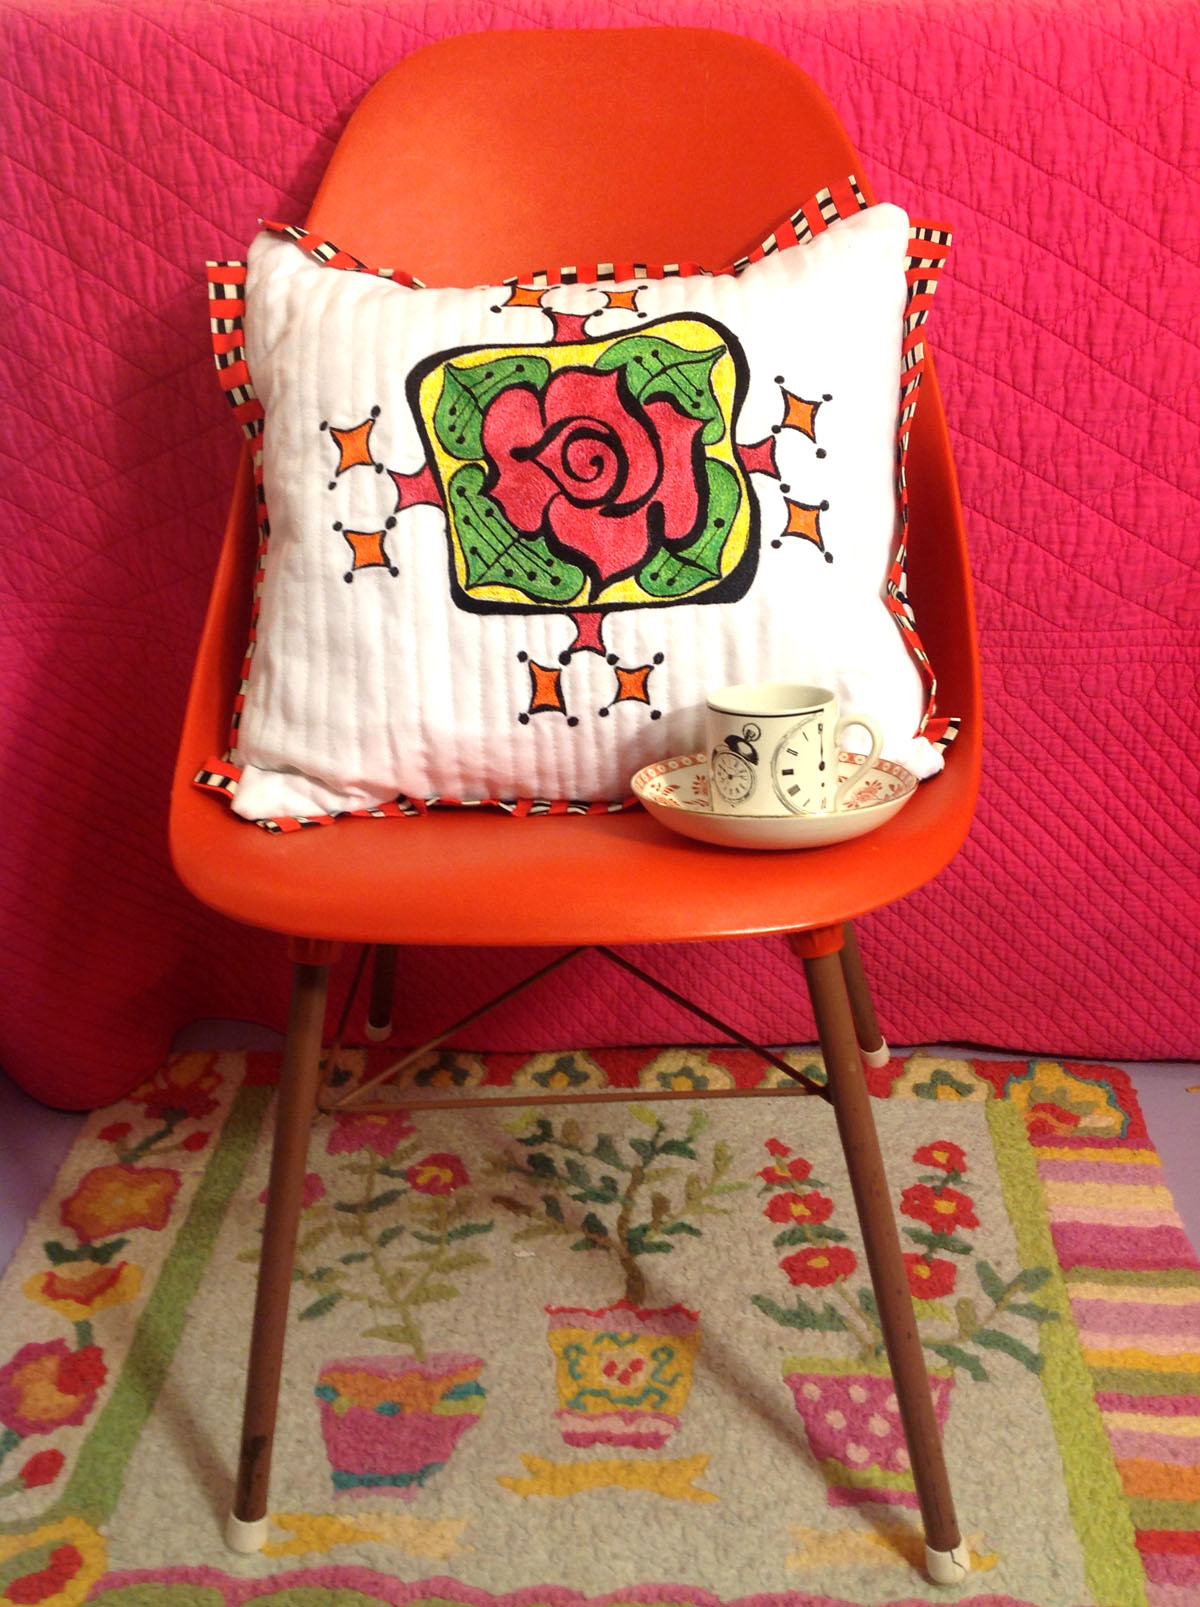 How to make a Thread Painted Rose Tile Pillow from WeAllSew